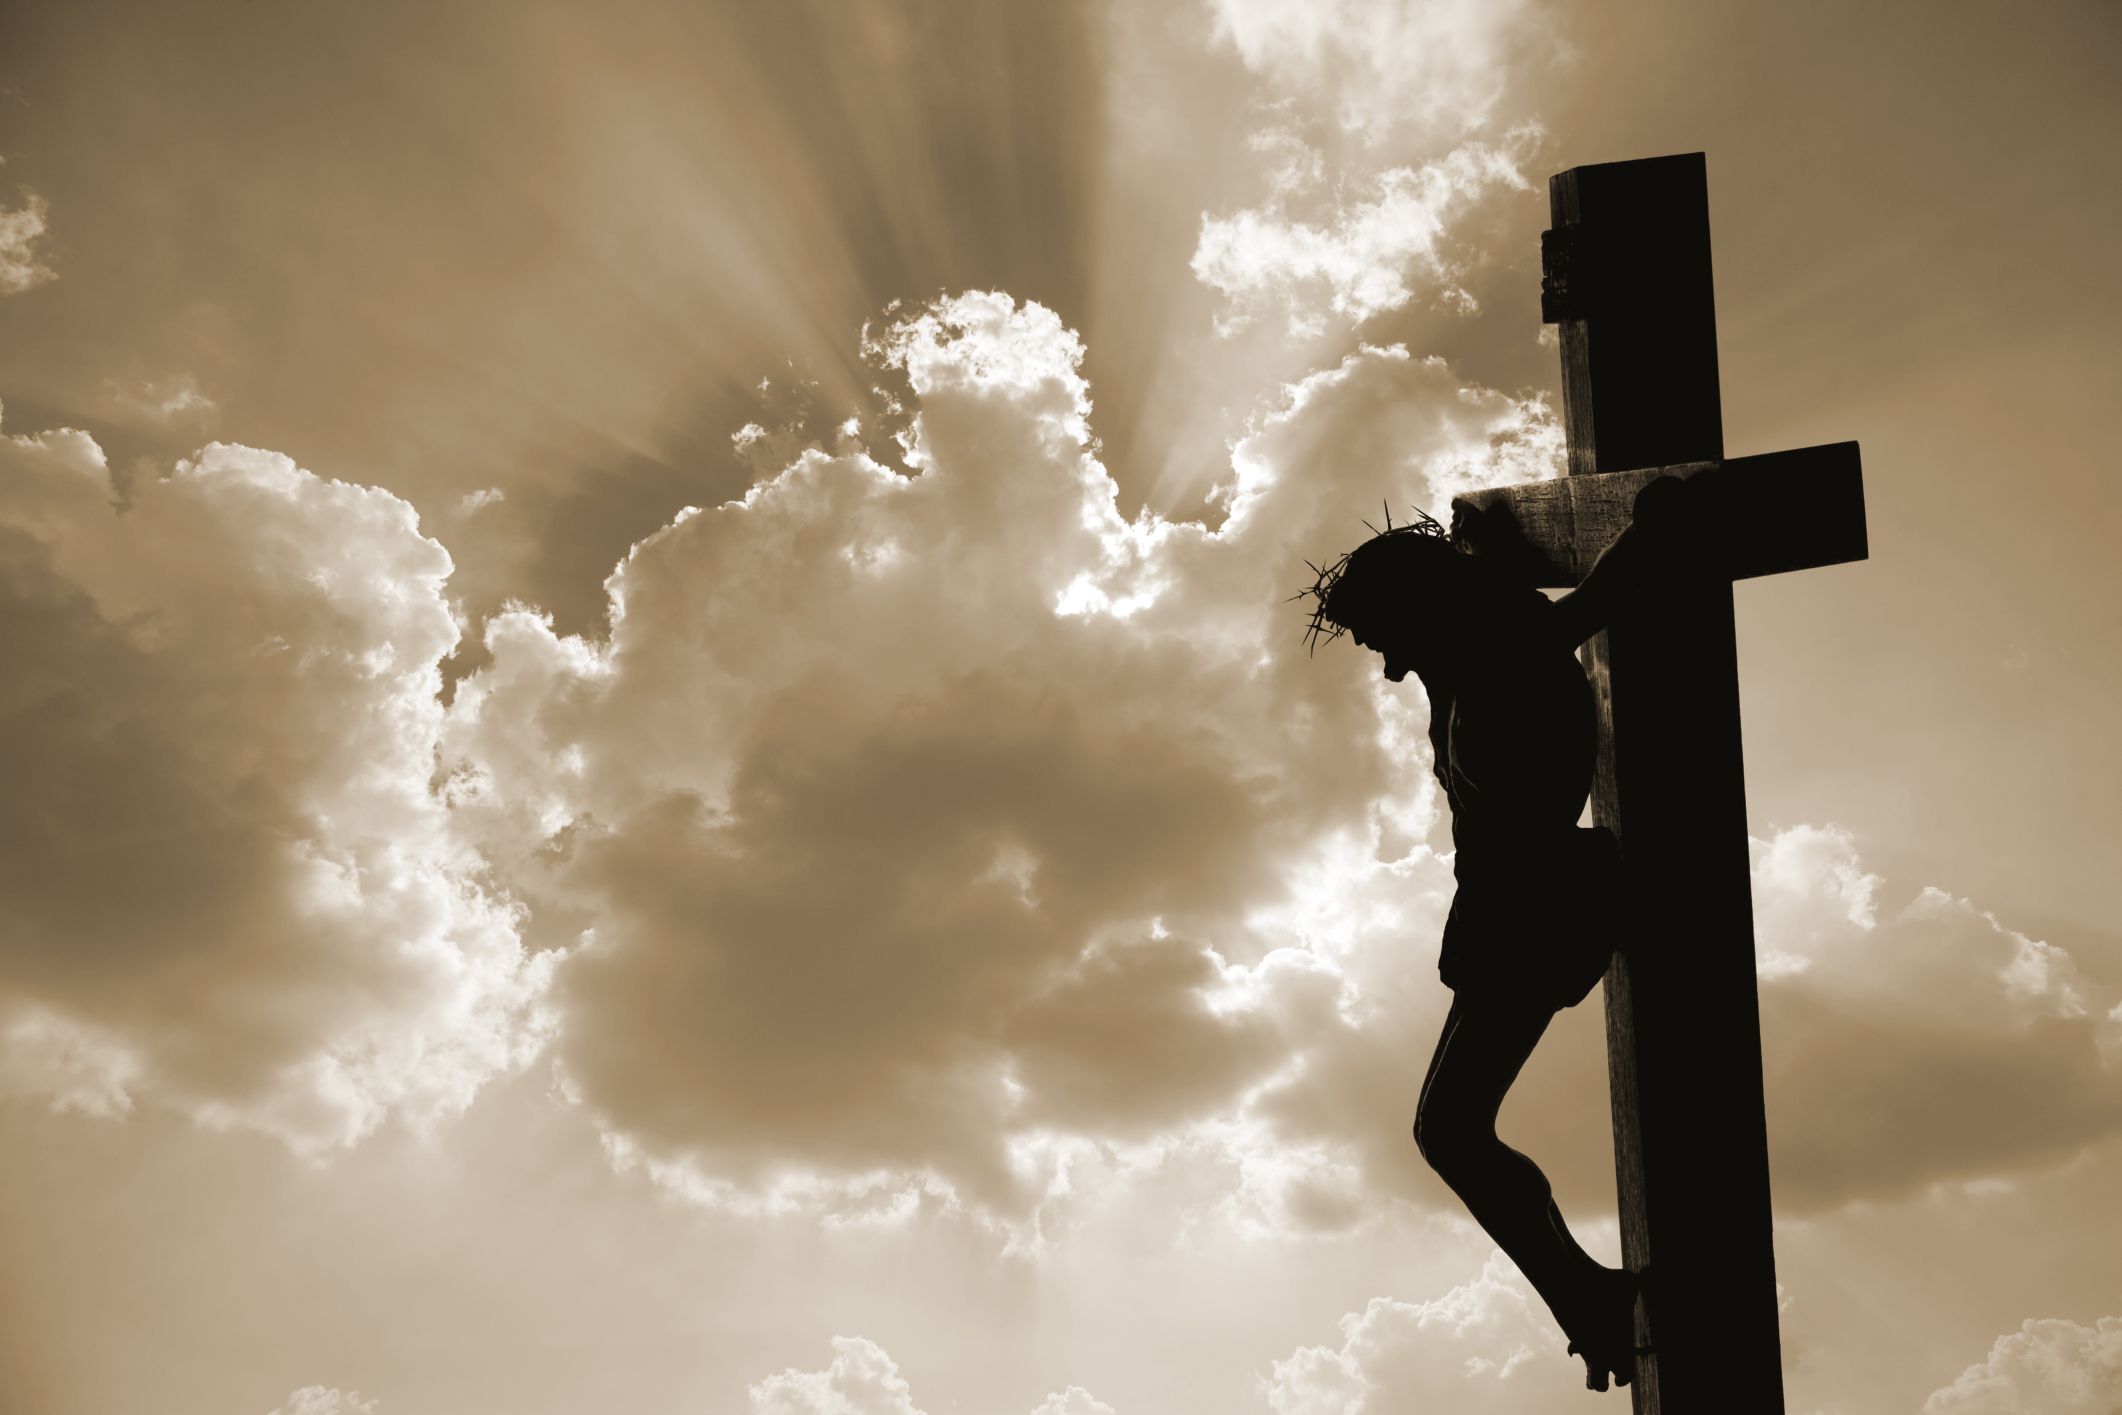 What’s so good about Good Friday?